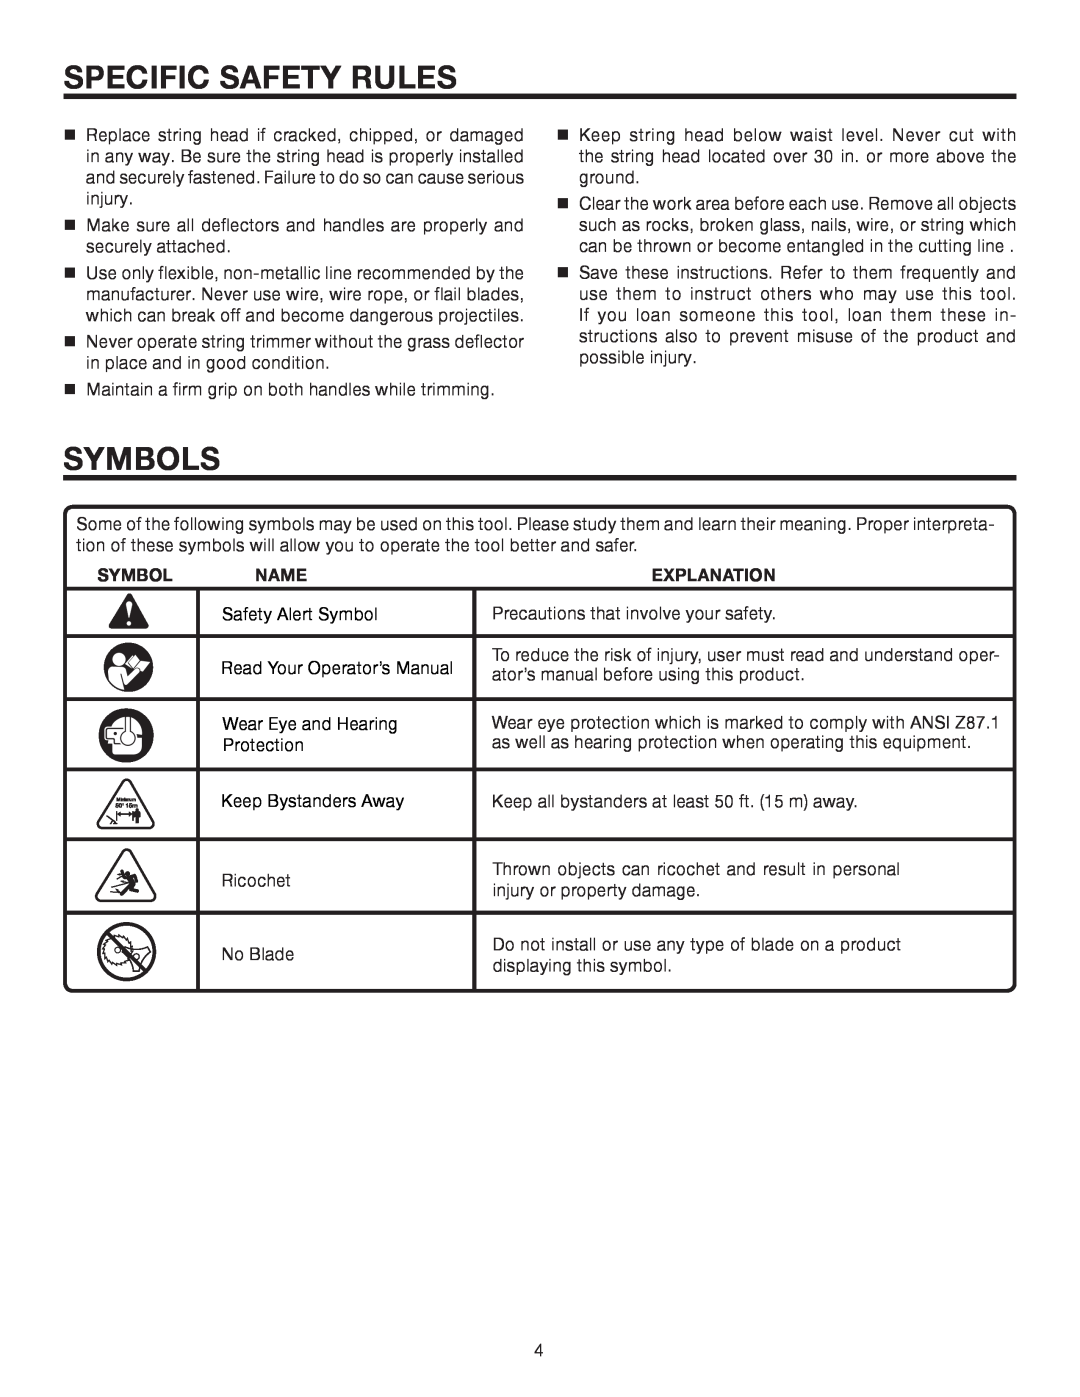 Homelite UT15522F manual Specific Safety Rules, Symbols, Name, Explanation 